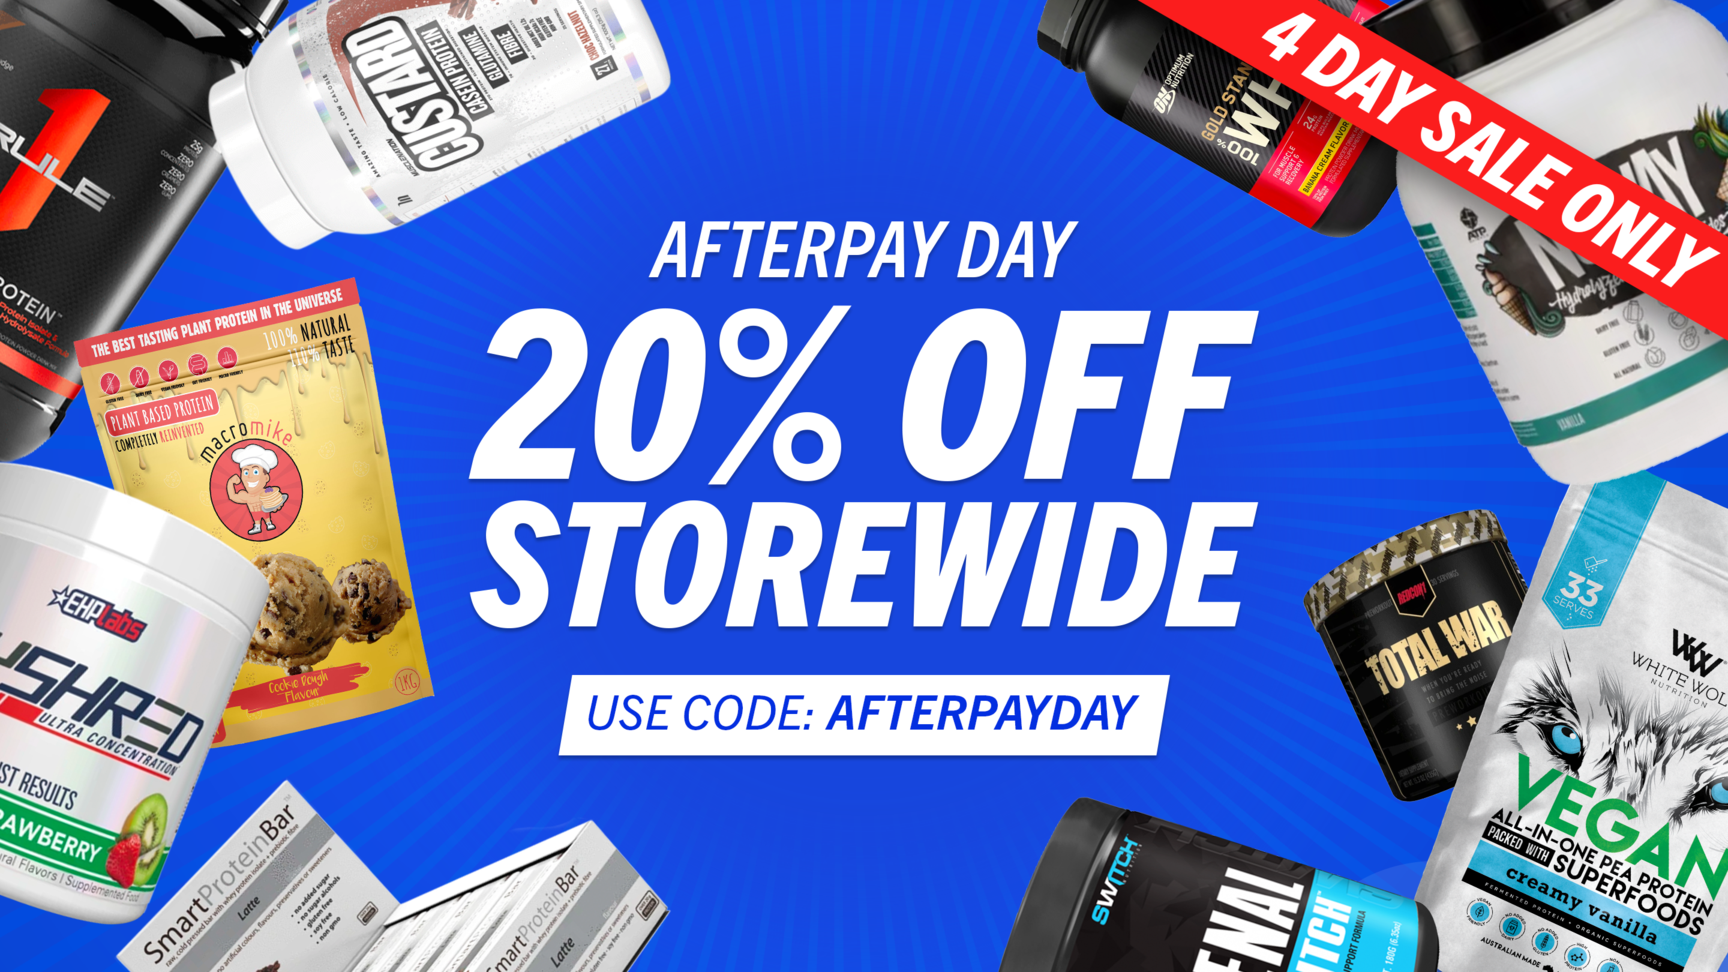 Afterpay Day sale - 20% OFF sitewide